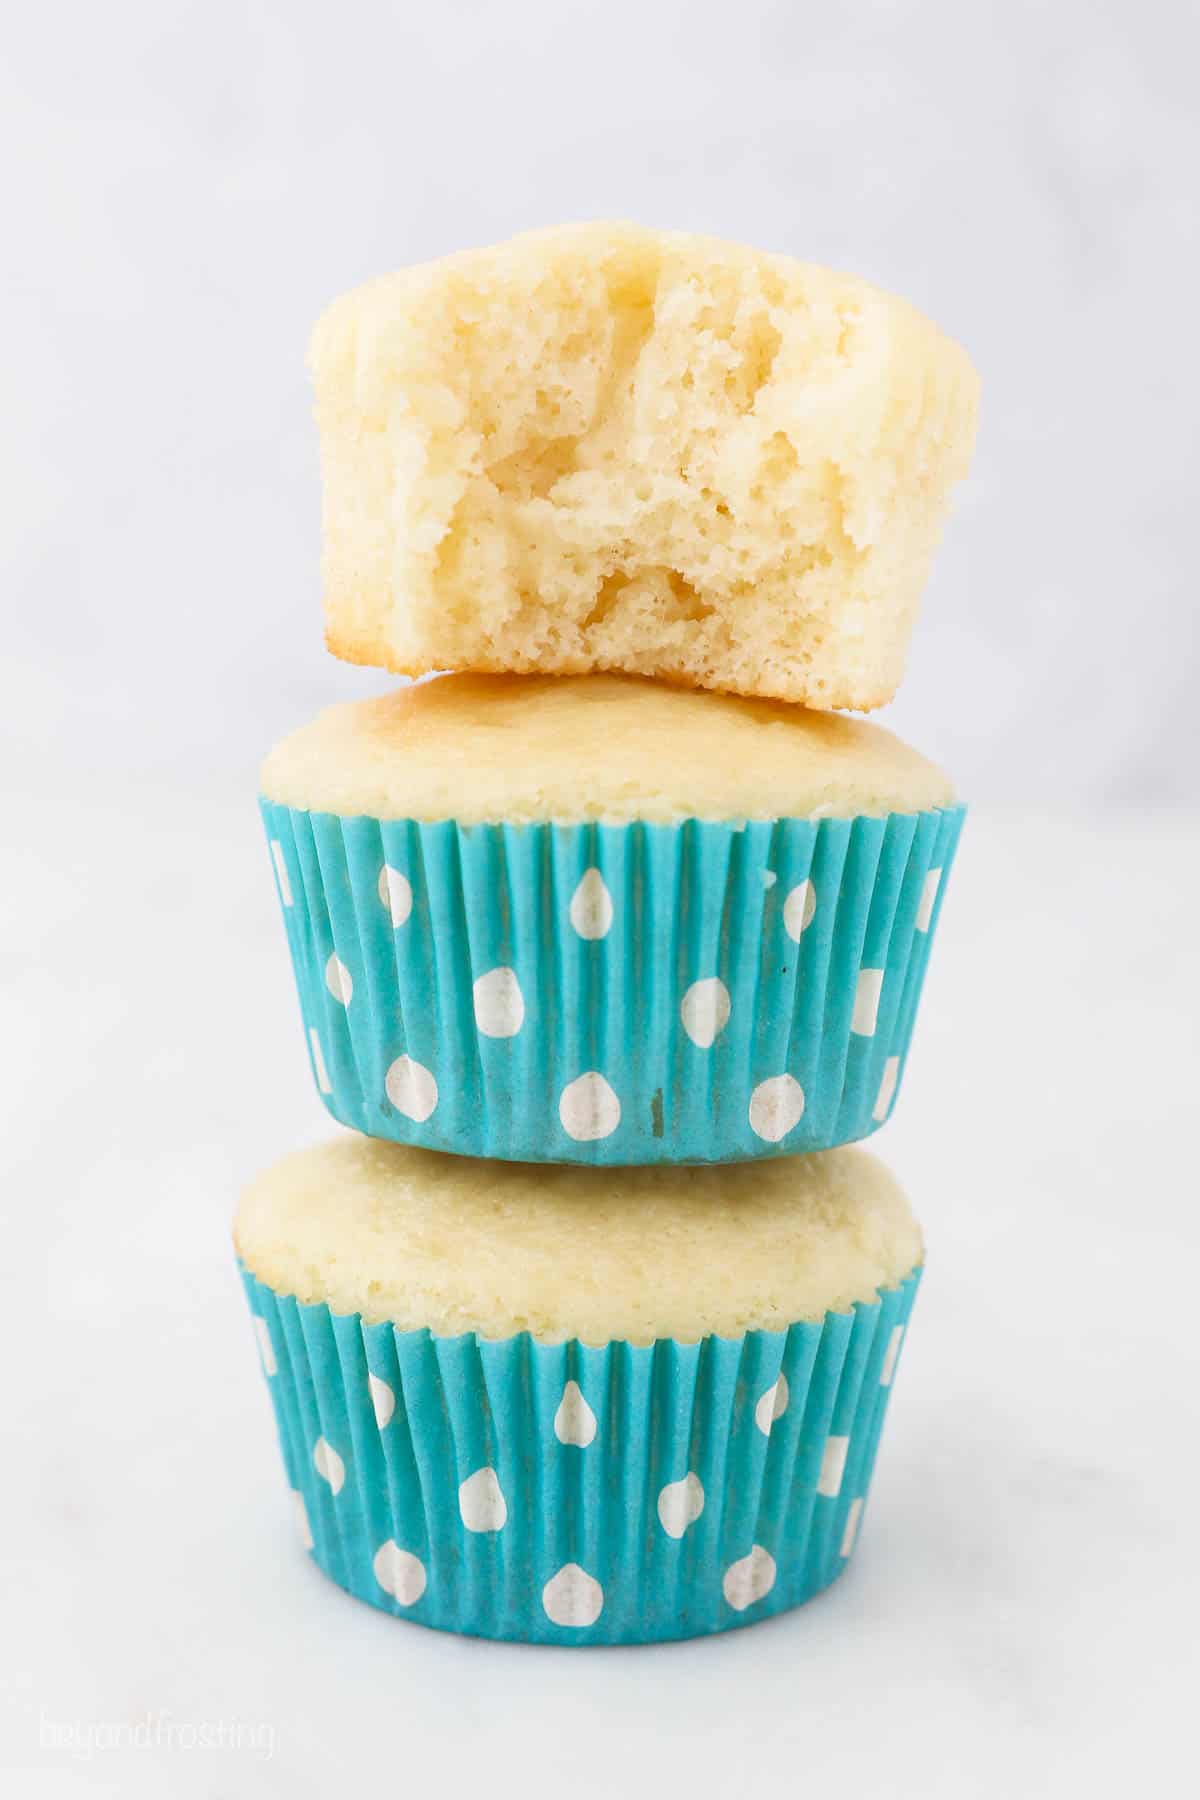 Three stacked vanilla cupcakes, the one on top has a bite missing